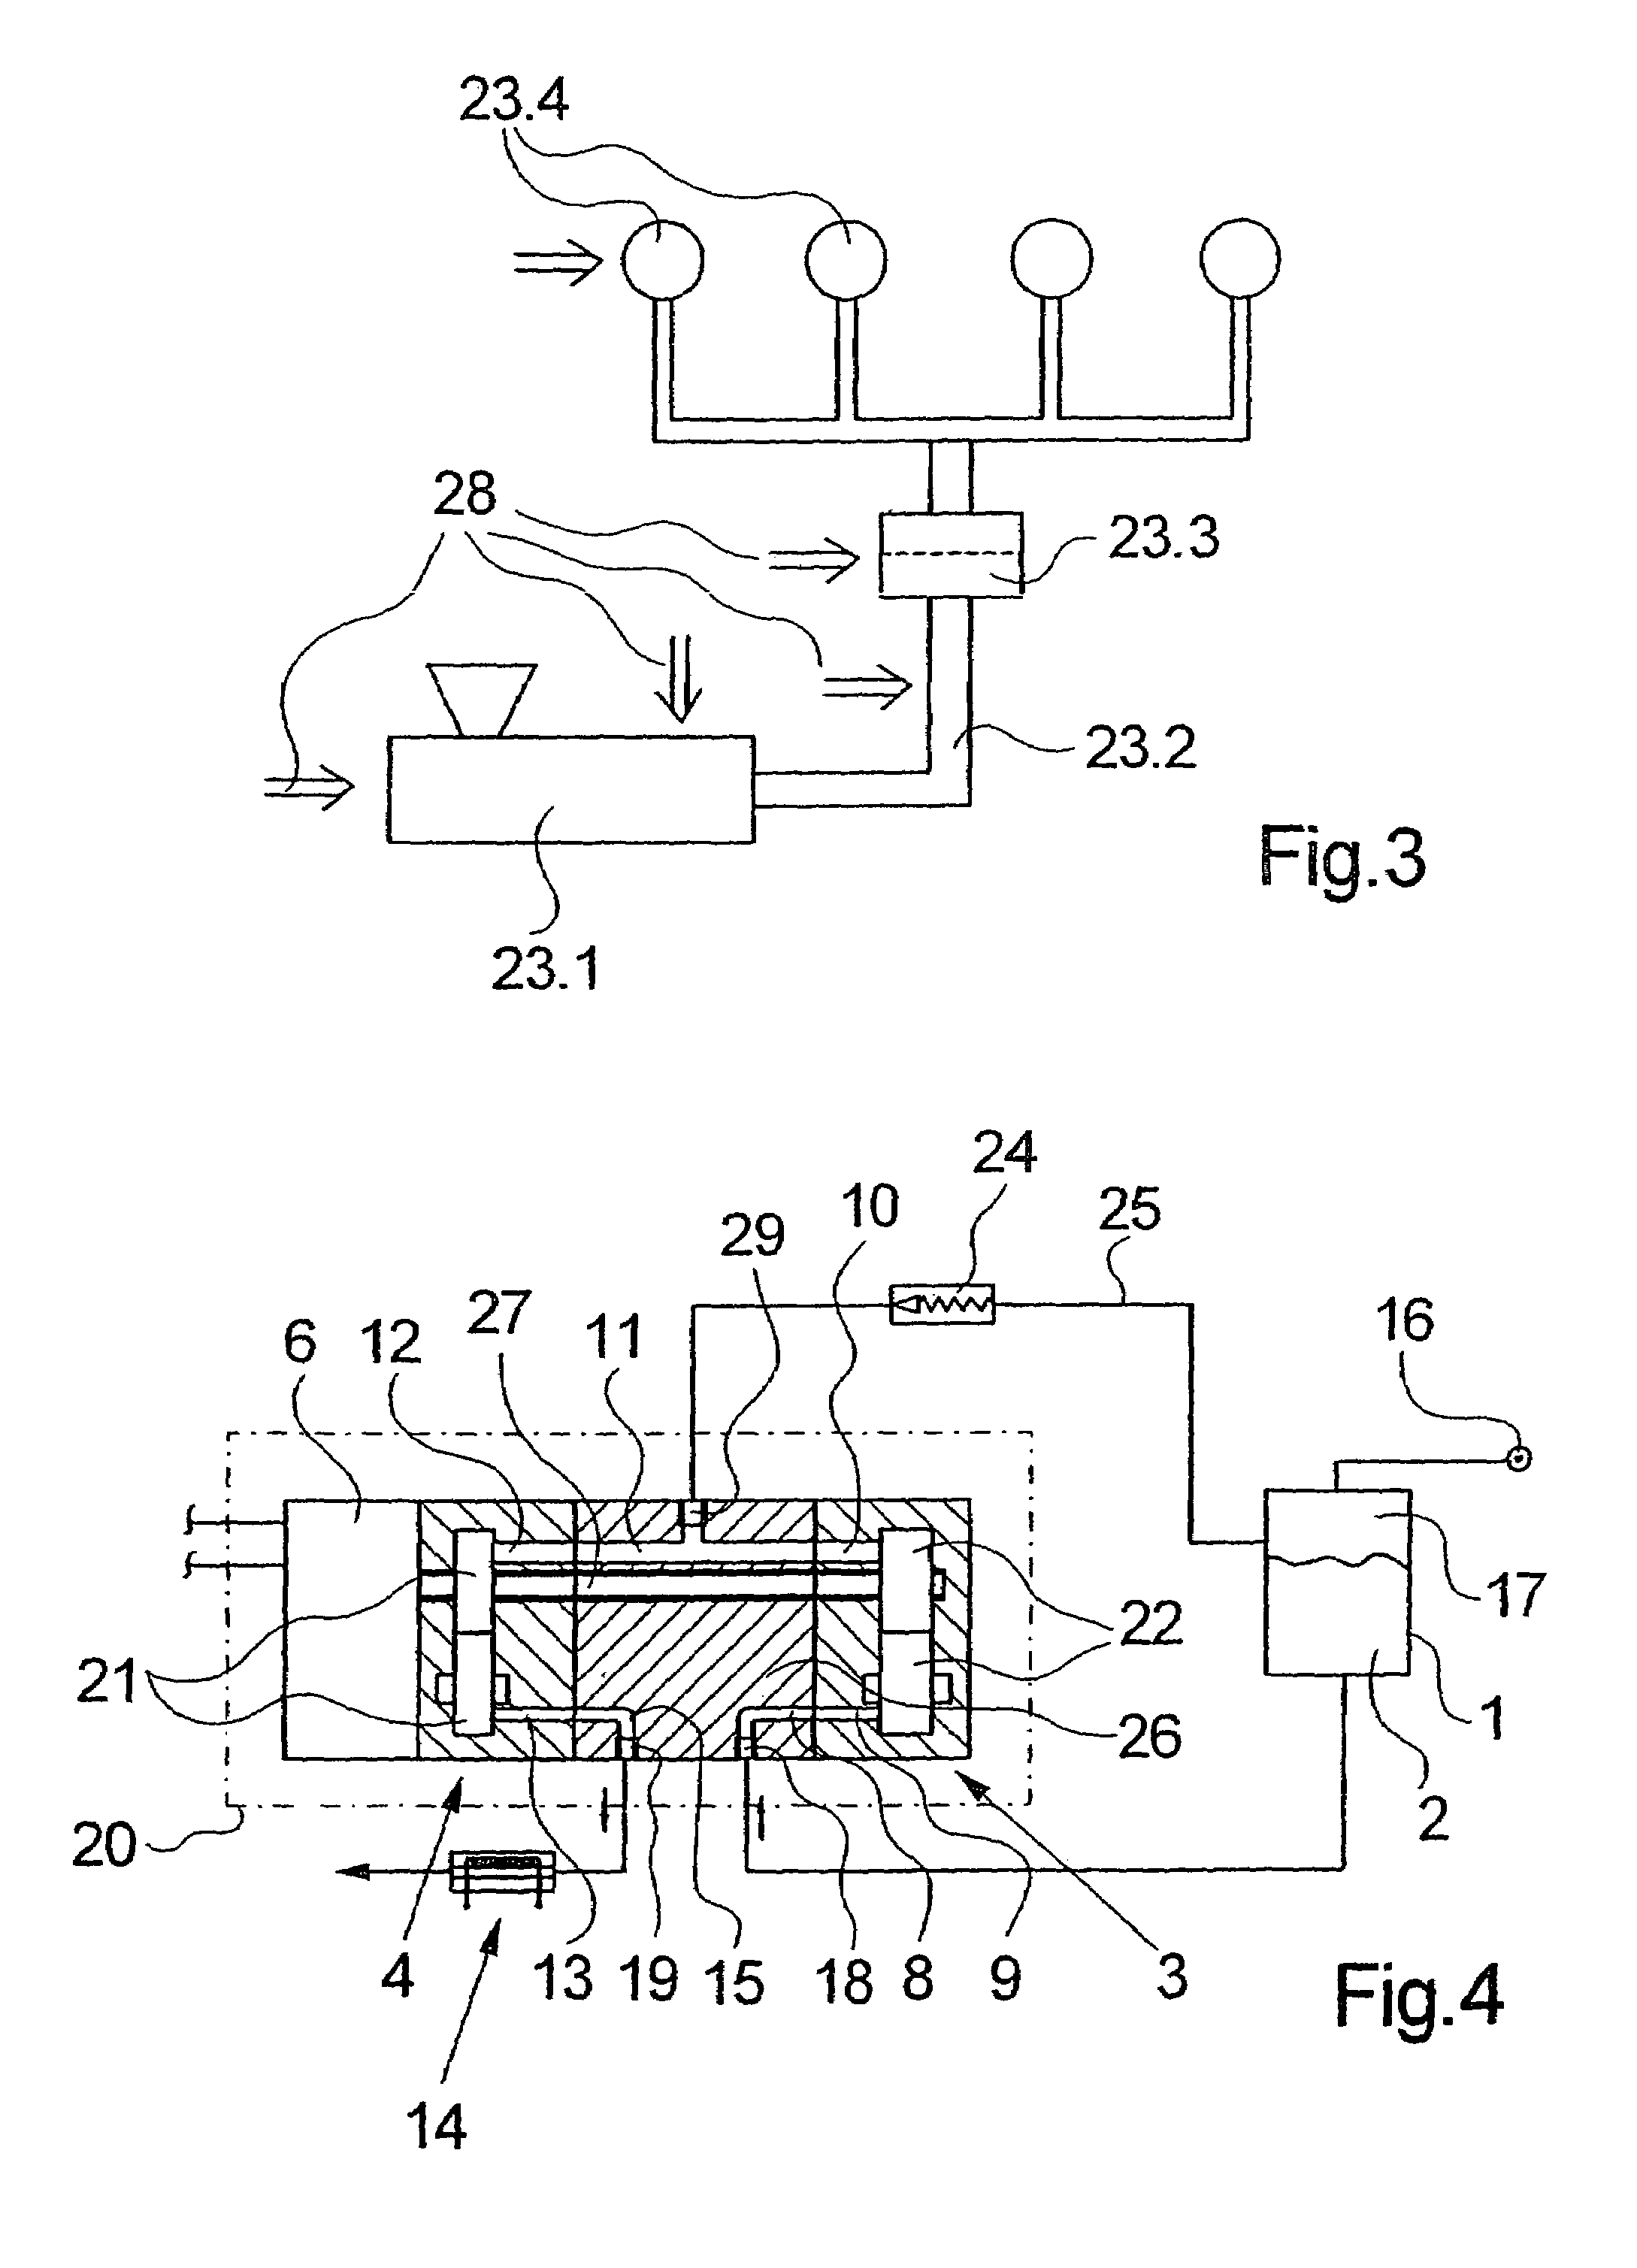 Apparatus and method for injecting a liquid dye into a polymer melt